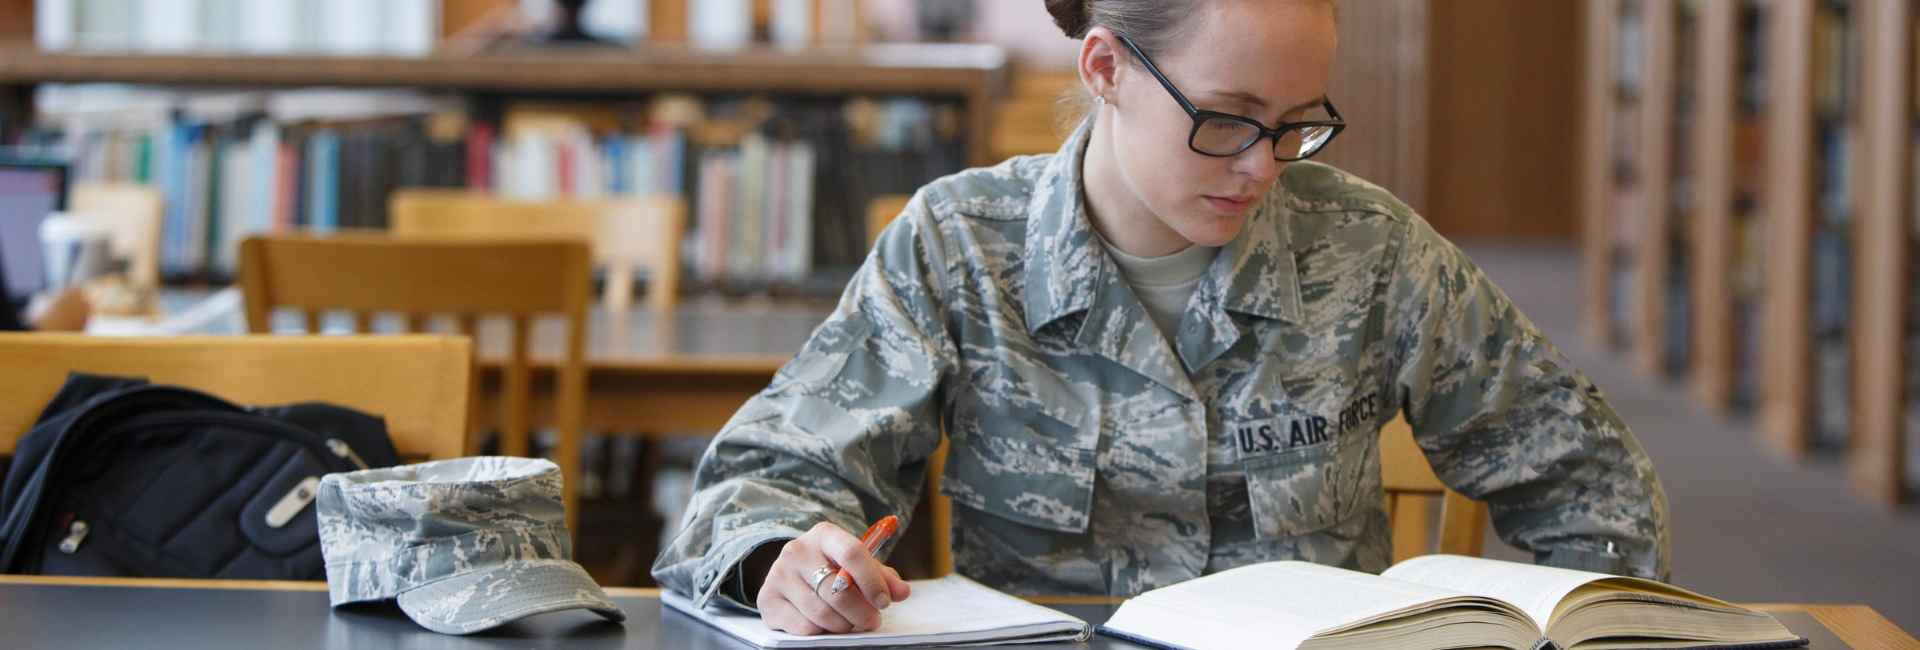 military student in library